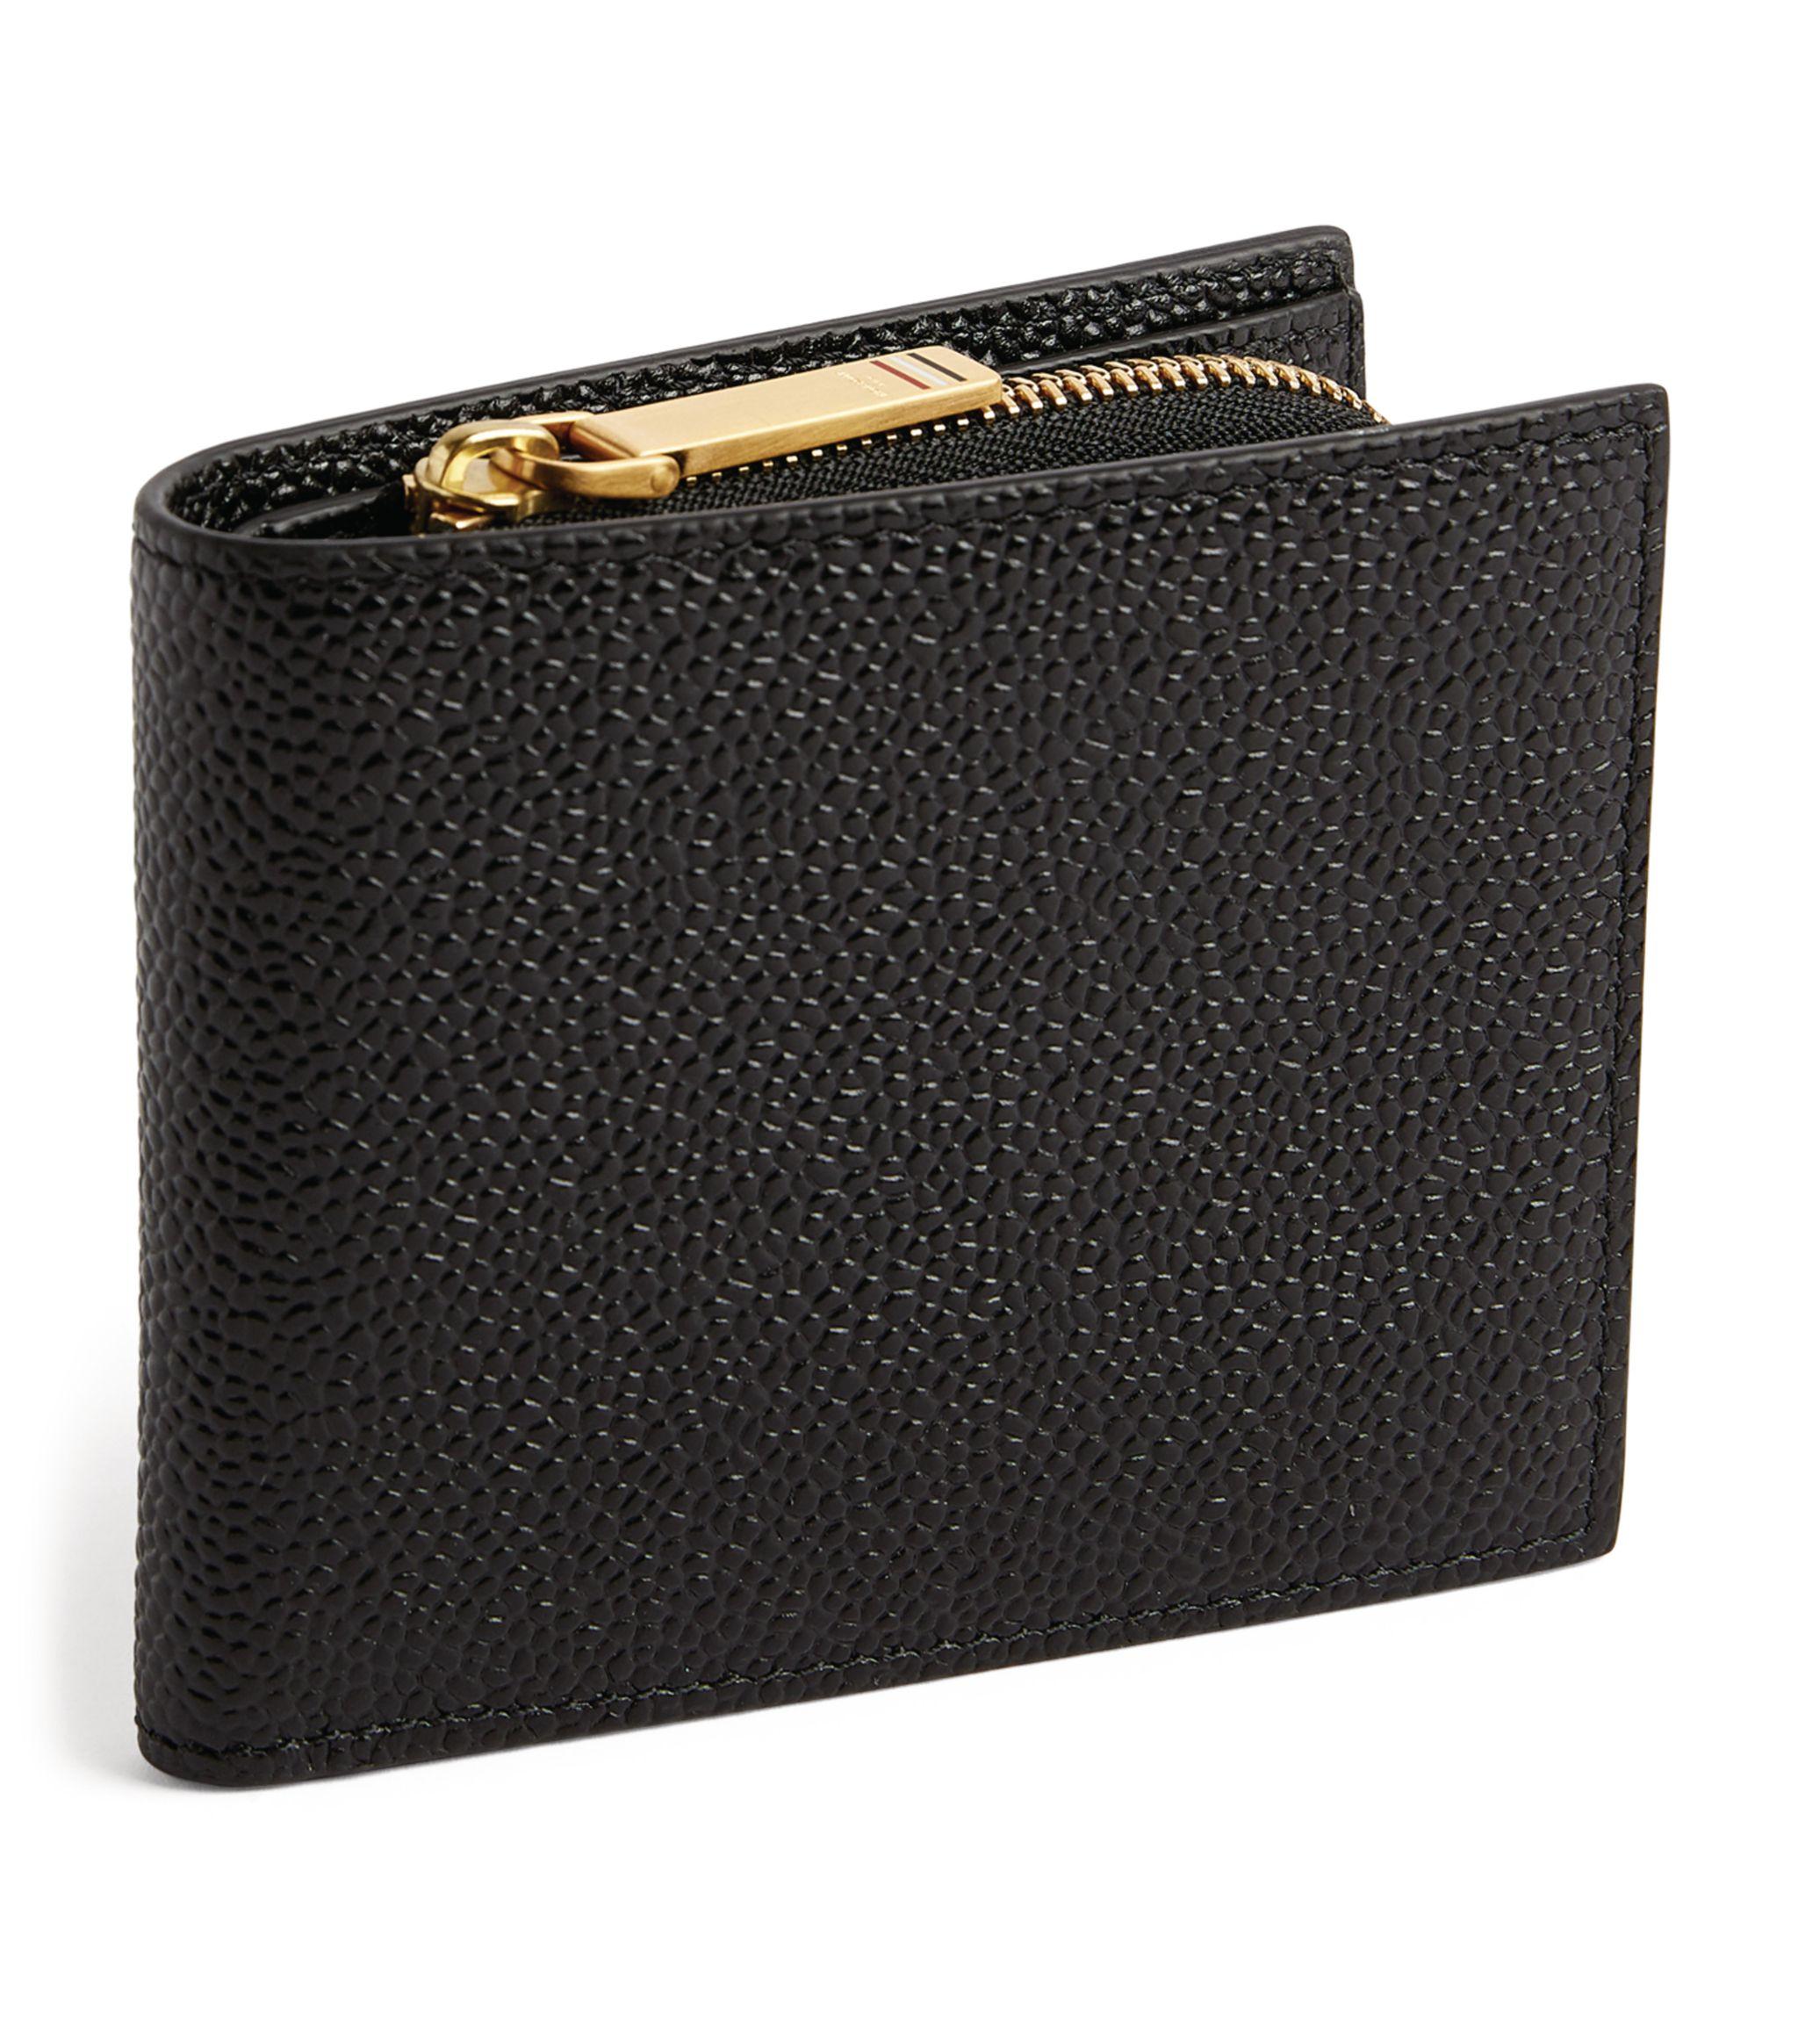 Thom Browne Grained Leather Bifold Wallet in Black for Men - Lyst